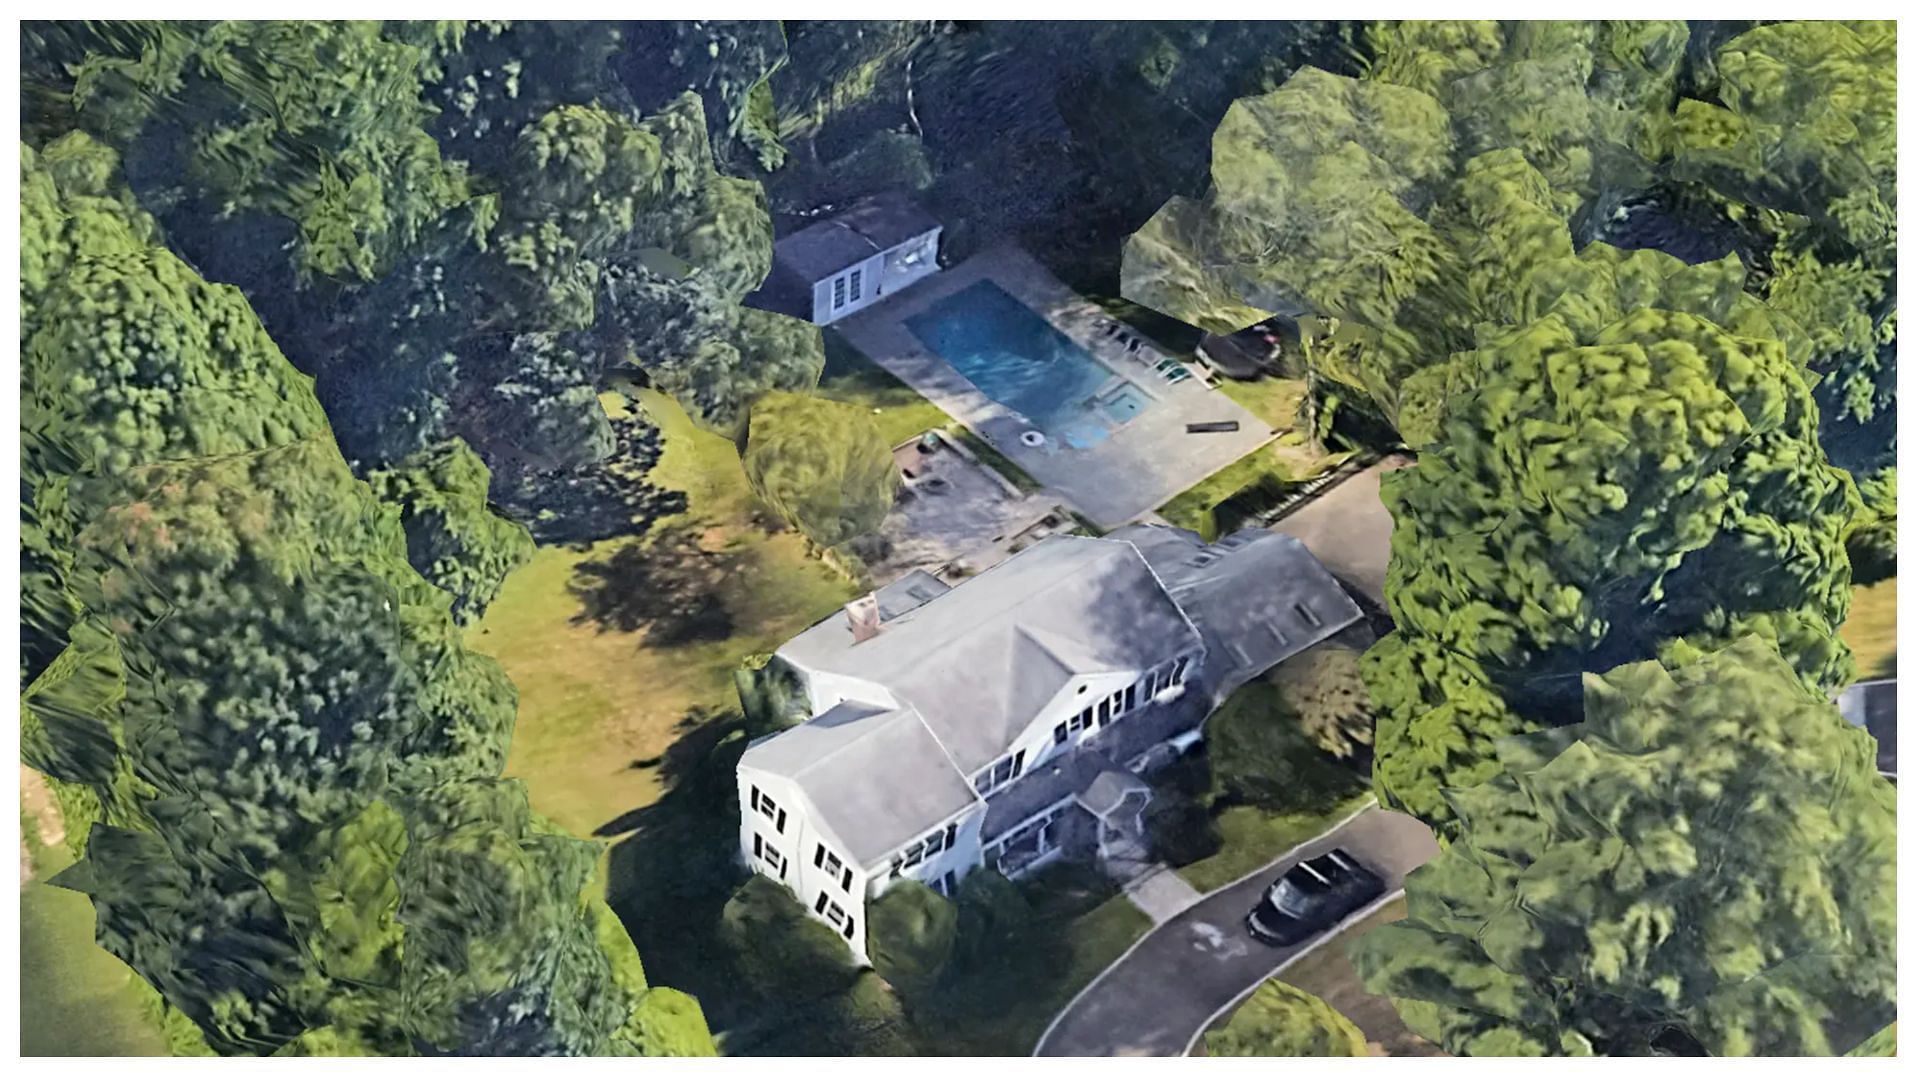 Tapp allegedly bought her Connecticut home with illict funds (image via Google Earth)